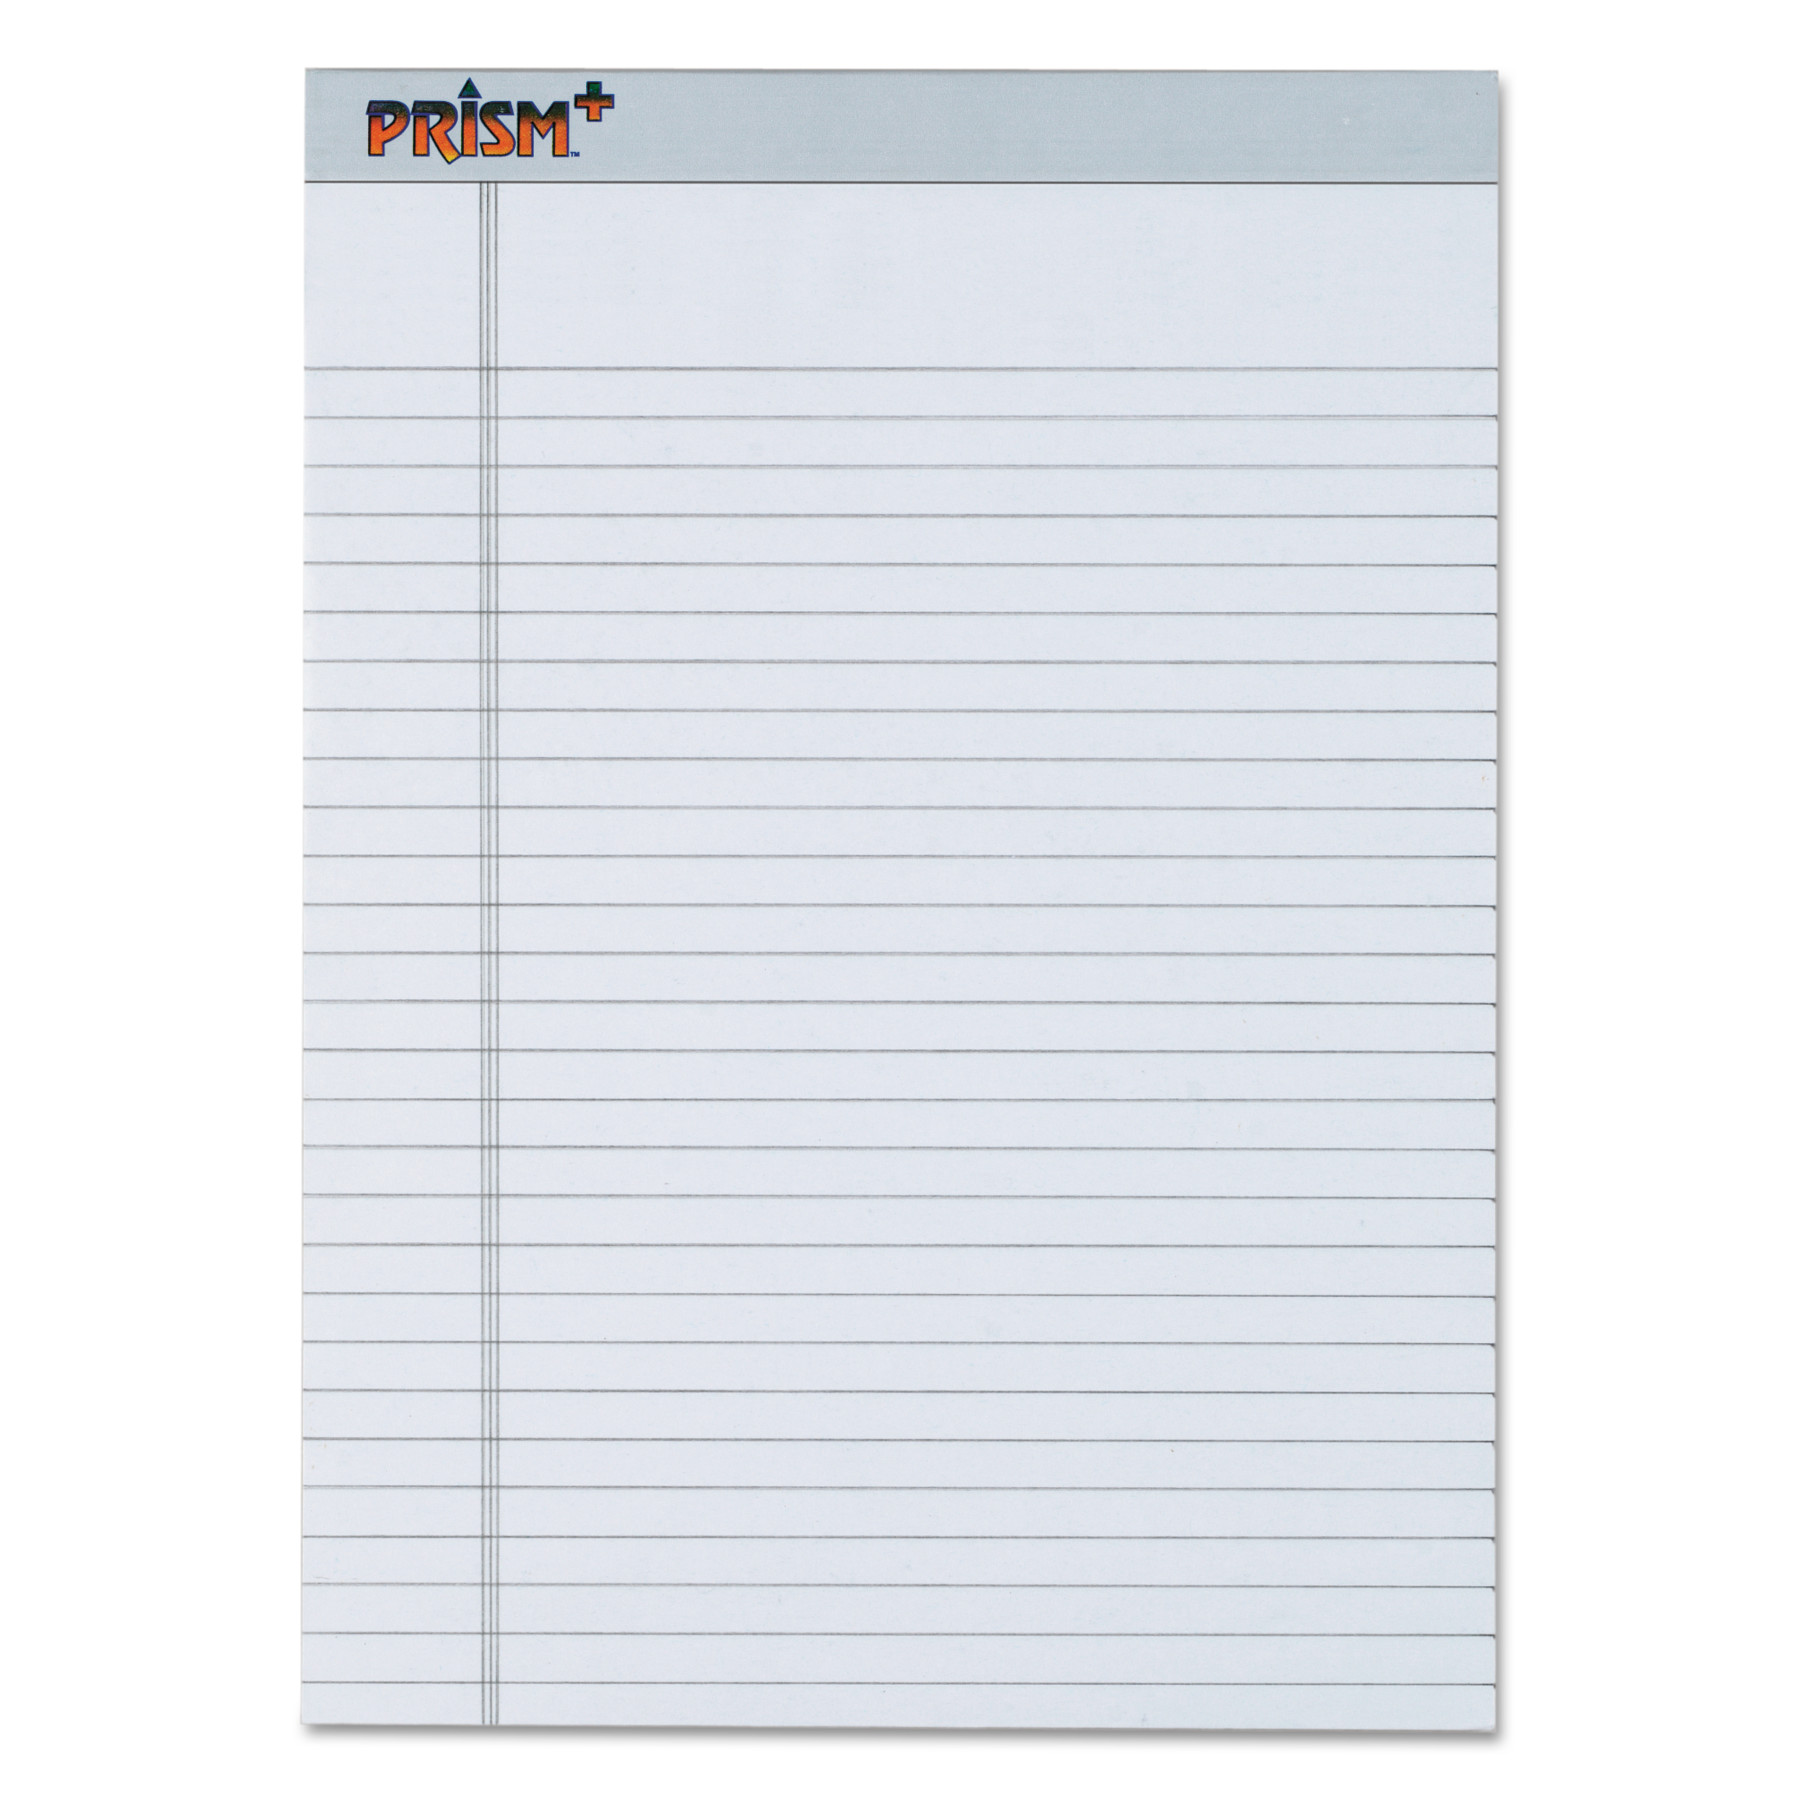 TOPS Prism Plus Colored Paper Pads - 50 Sheets - 0.34" Ruled - 16 lb Basis Weight - 8 1/2" x 11 3/4" - Gray Paper - Perforated